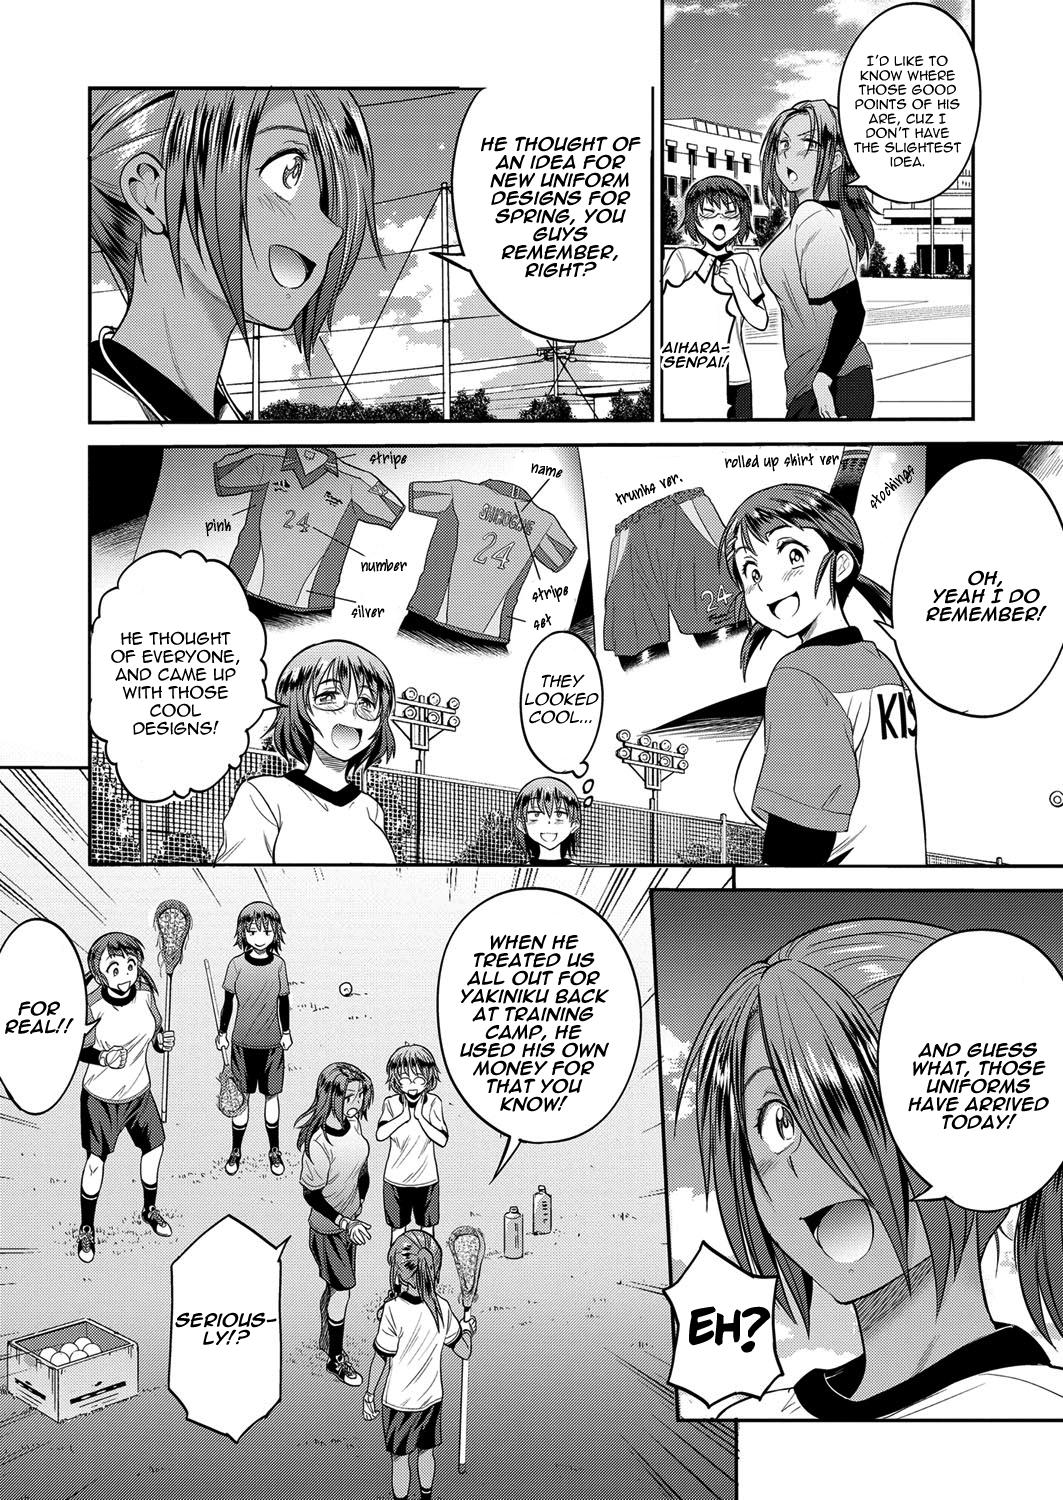 Desperate [DISTANCE] Joshi Lacu! - Girls Lacrosse Club ~2 Years Later~ Ch. 1.5 (COMIC ExE 06) [English] [TripleSevenScans] [Digital] Lesbian Sex - Page 2